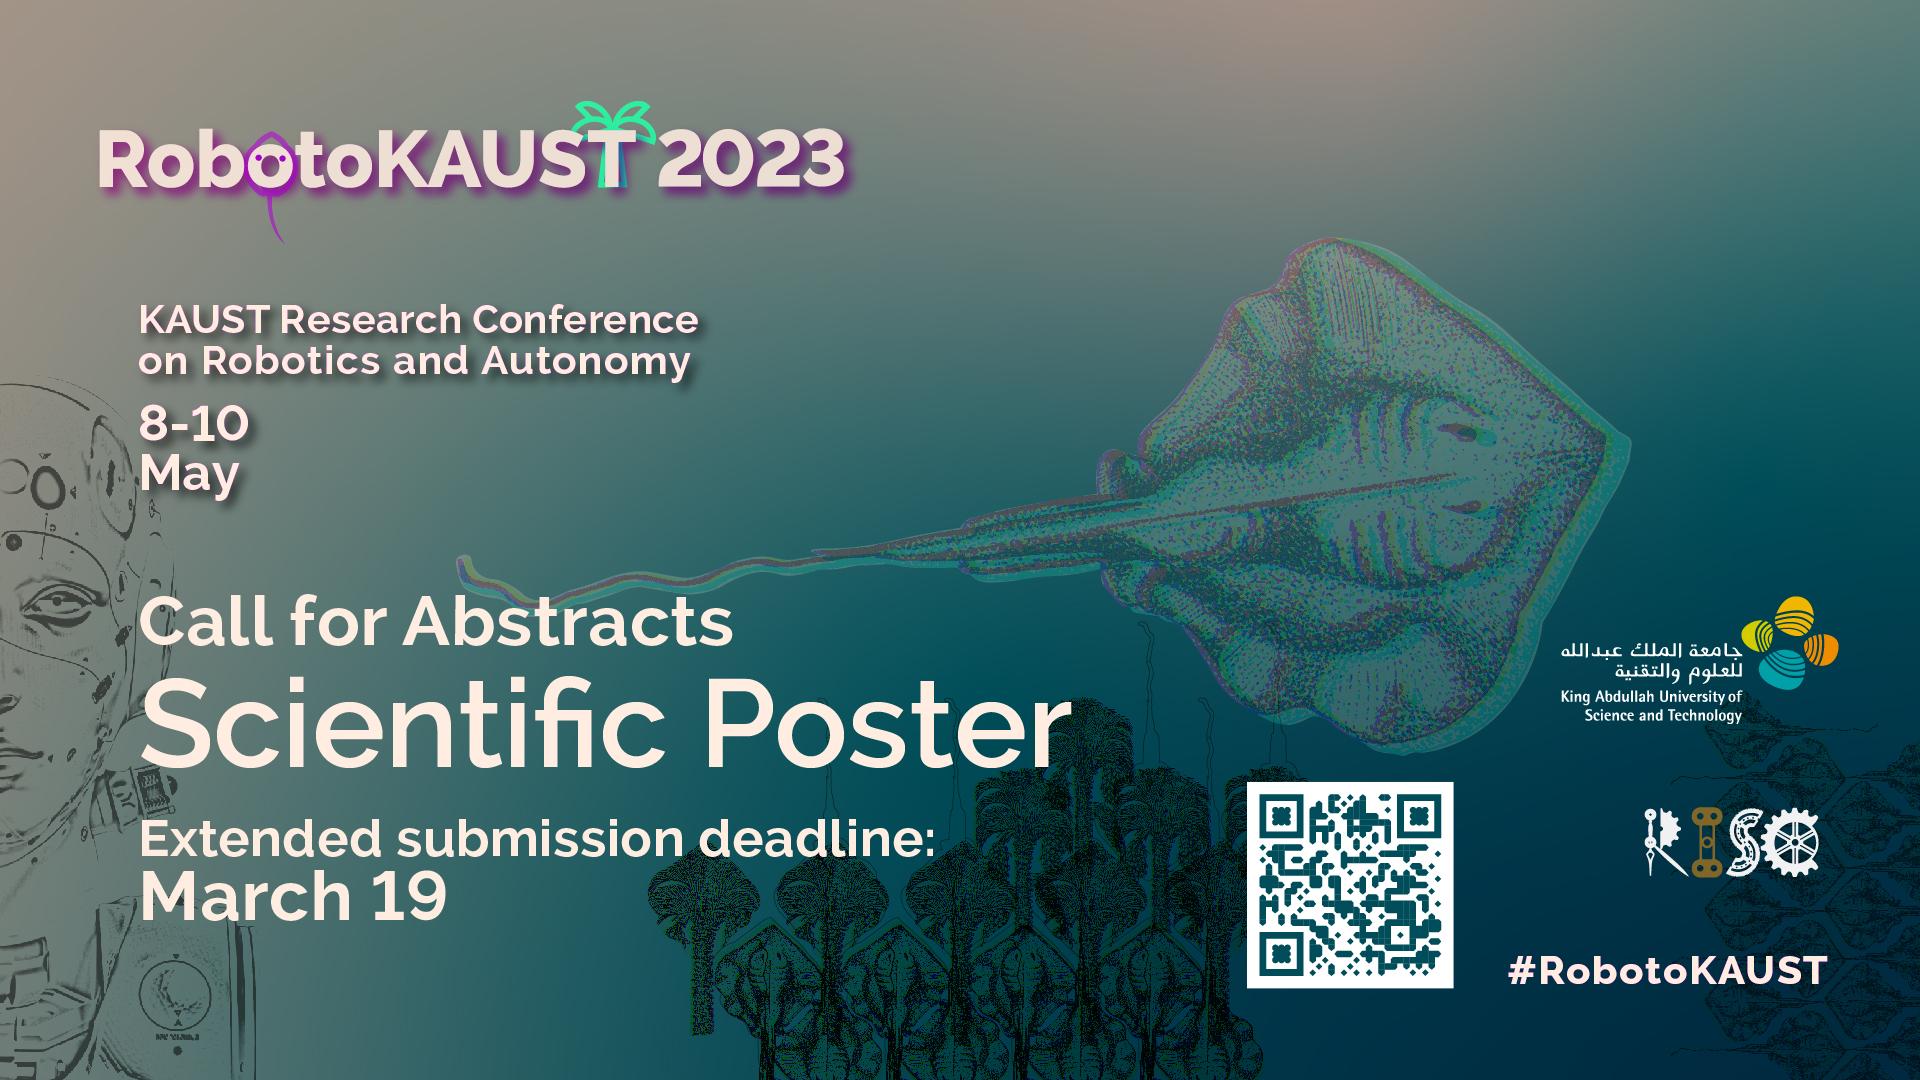 ROBOTOKAUST 2023 Call for Poster Abstracts - Extended Deadline 